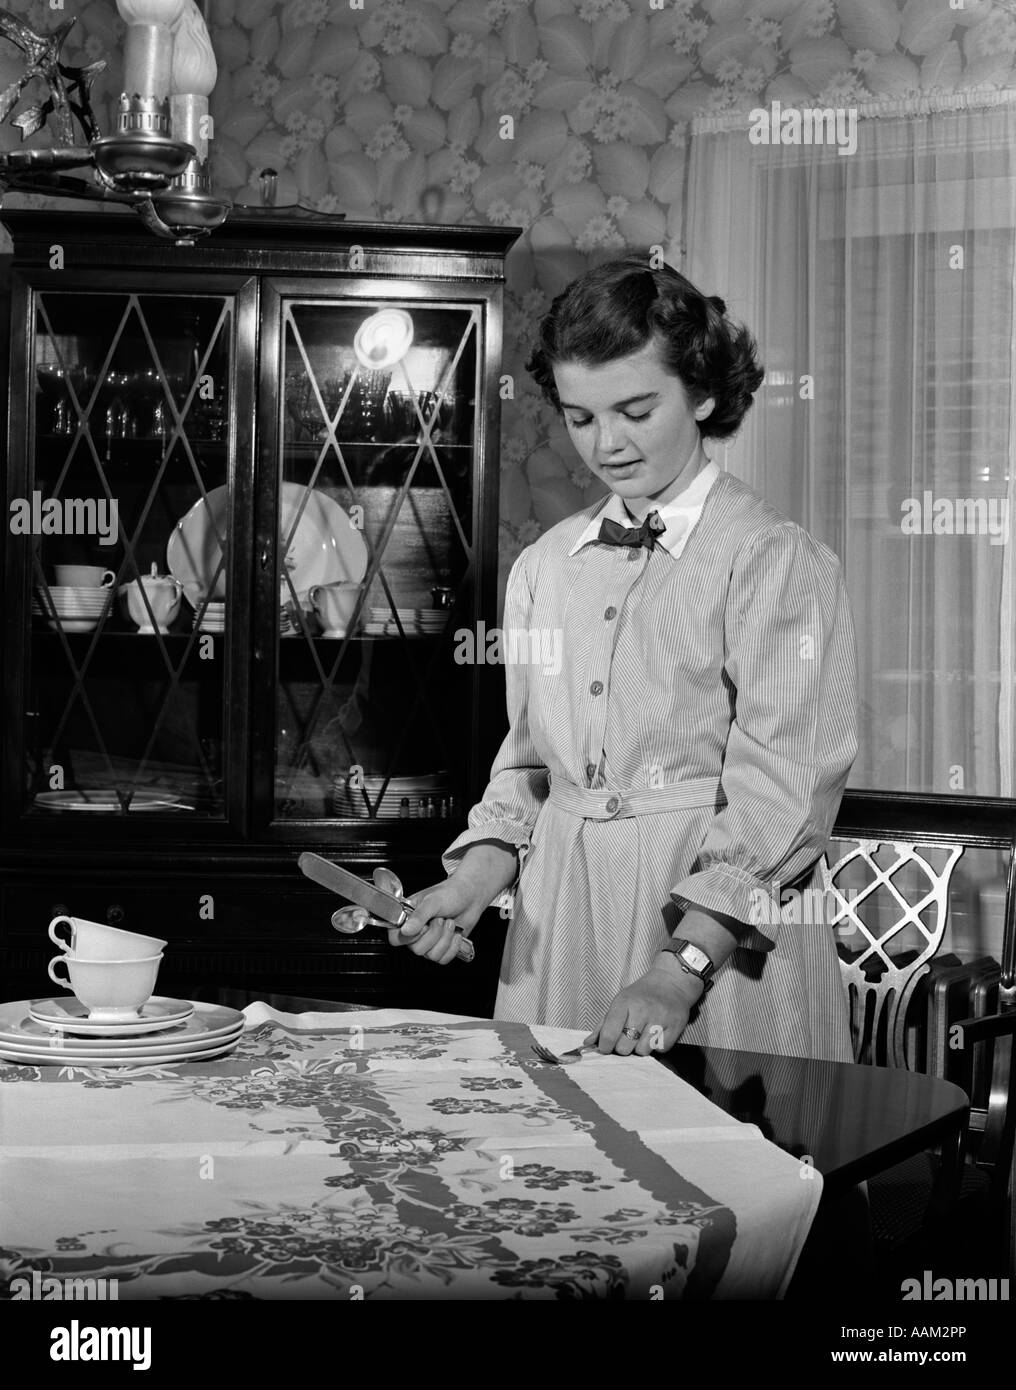 1950s TEEN GIRL SETTING THE TABLE IN DINING ROOM DOING HER HOUSEHOLD CHORE Stock Photo